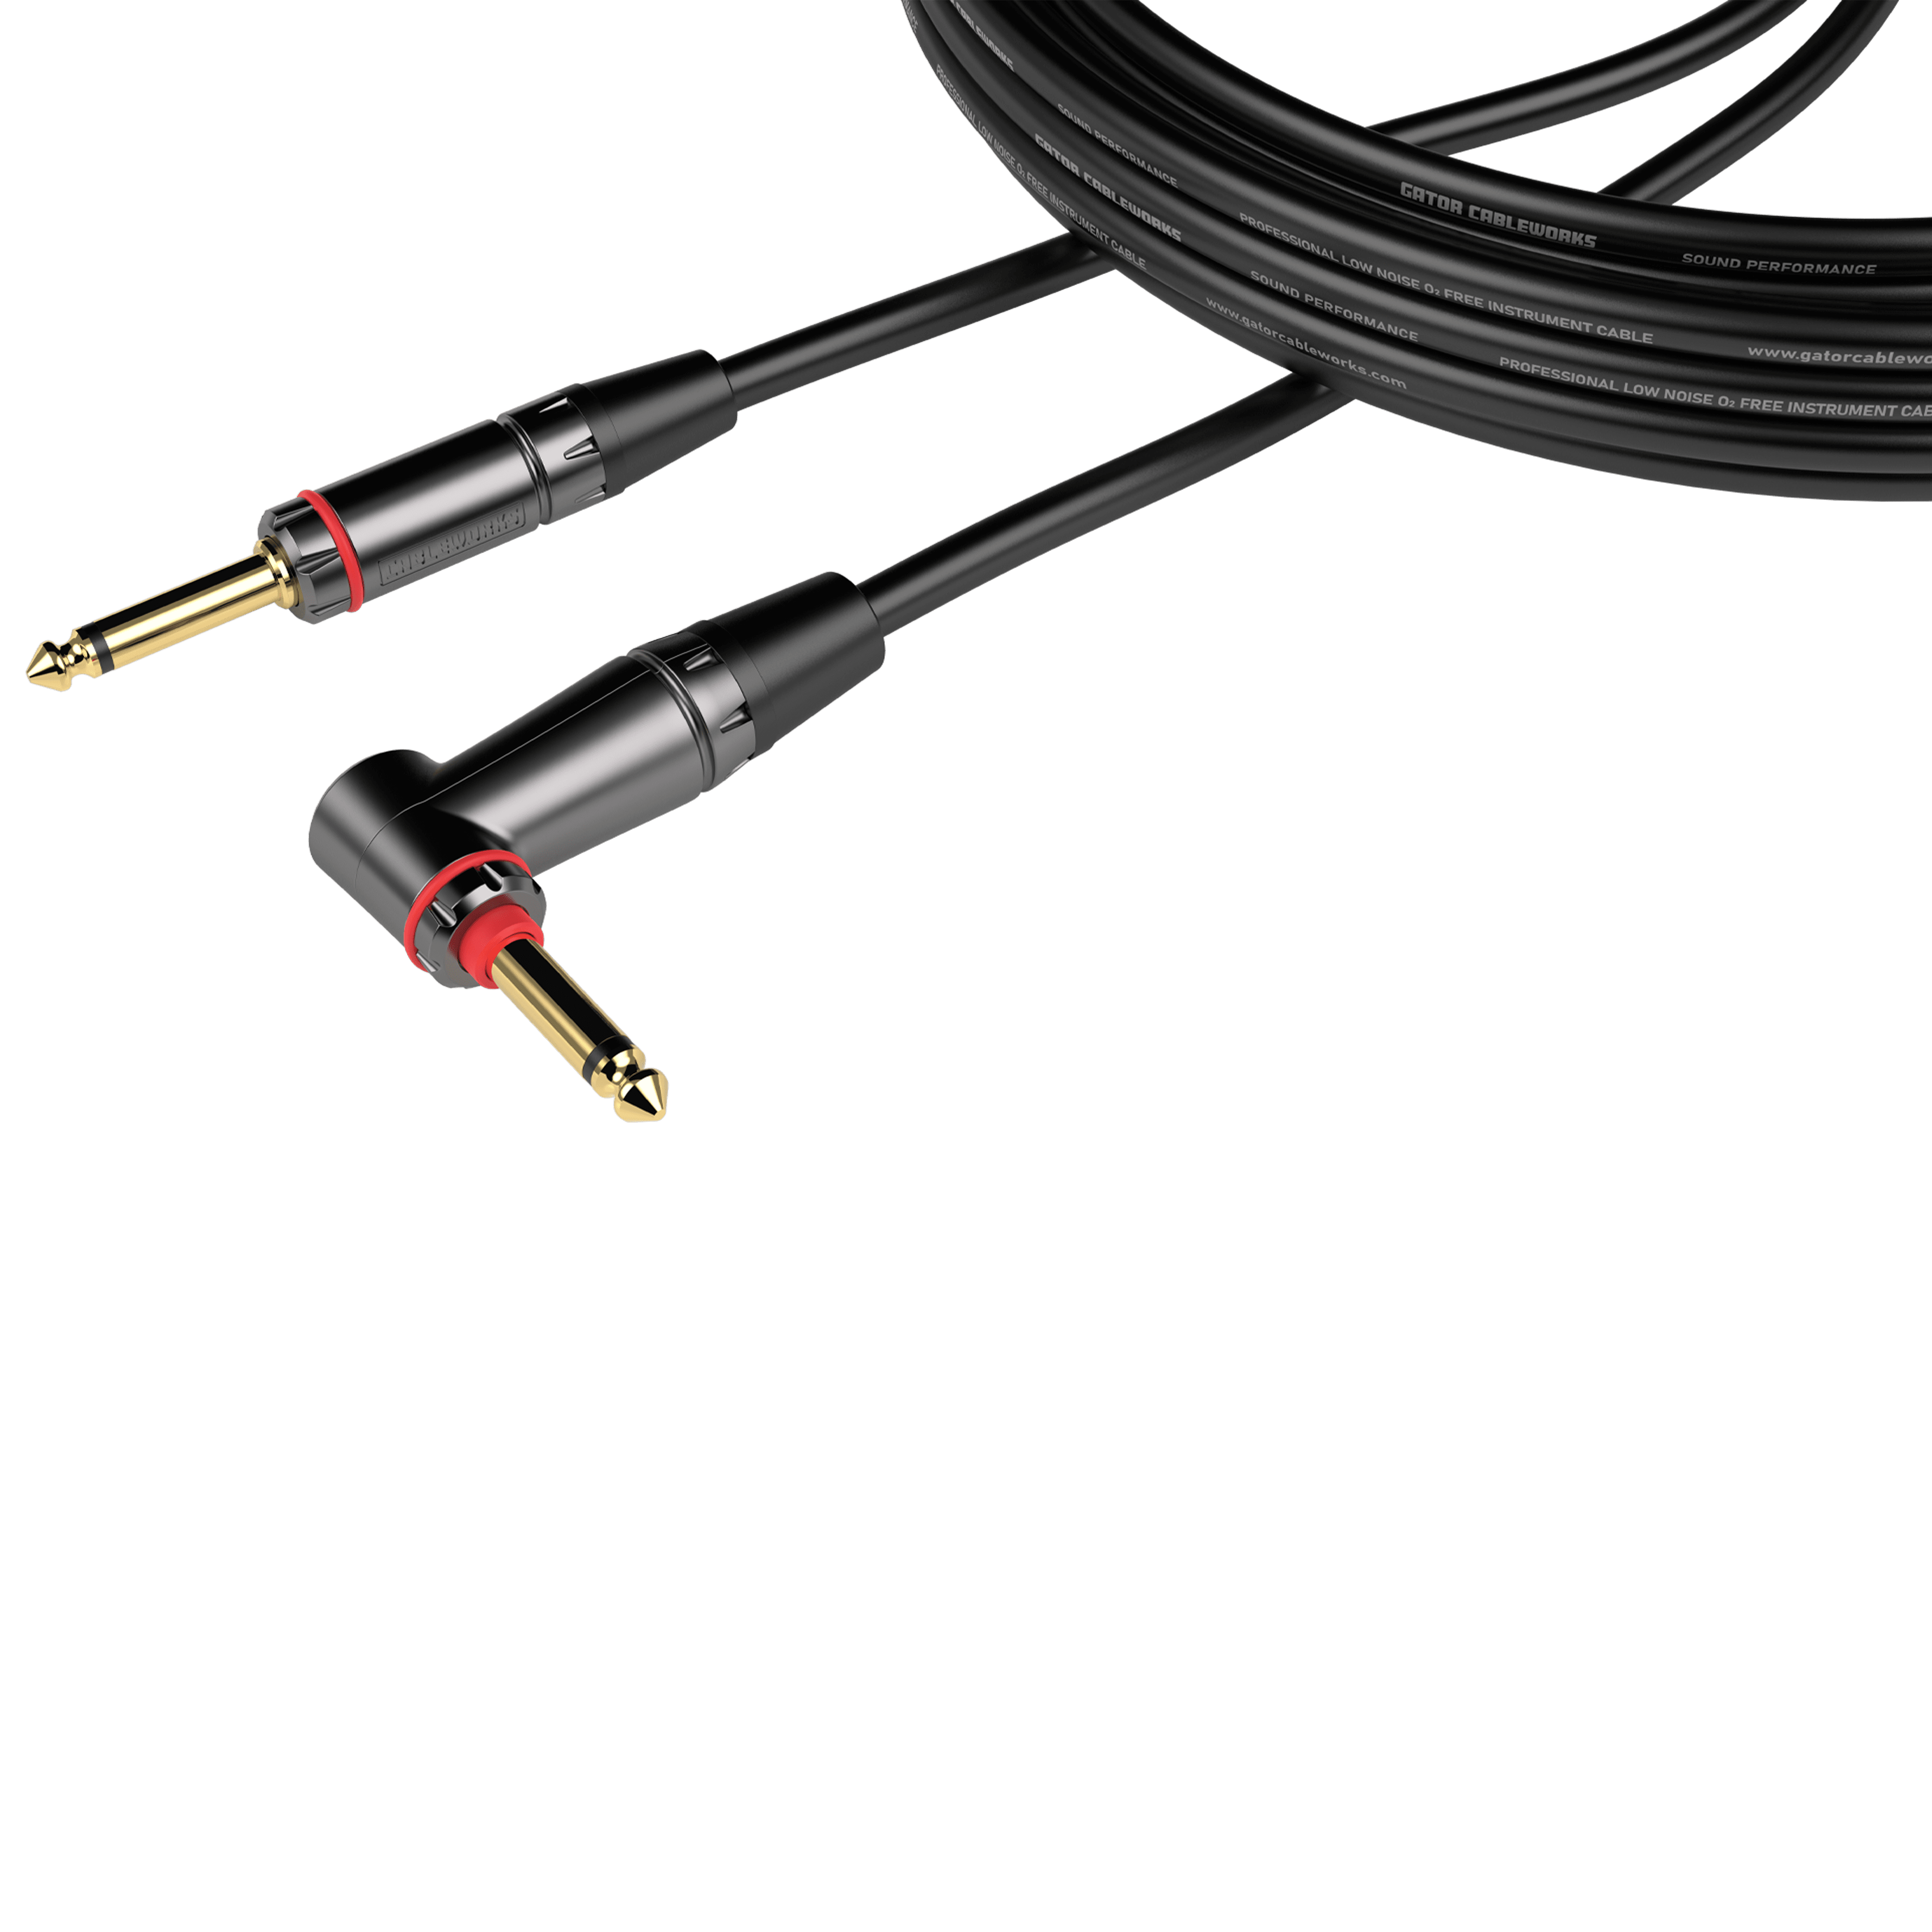 20 Foot Strt to RA Instrument Cable